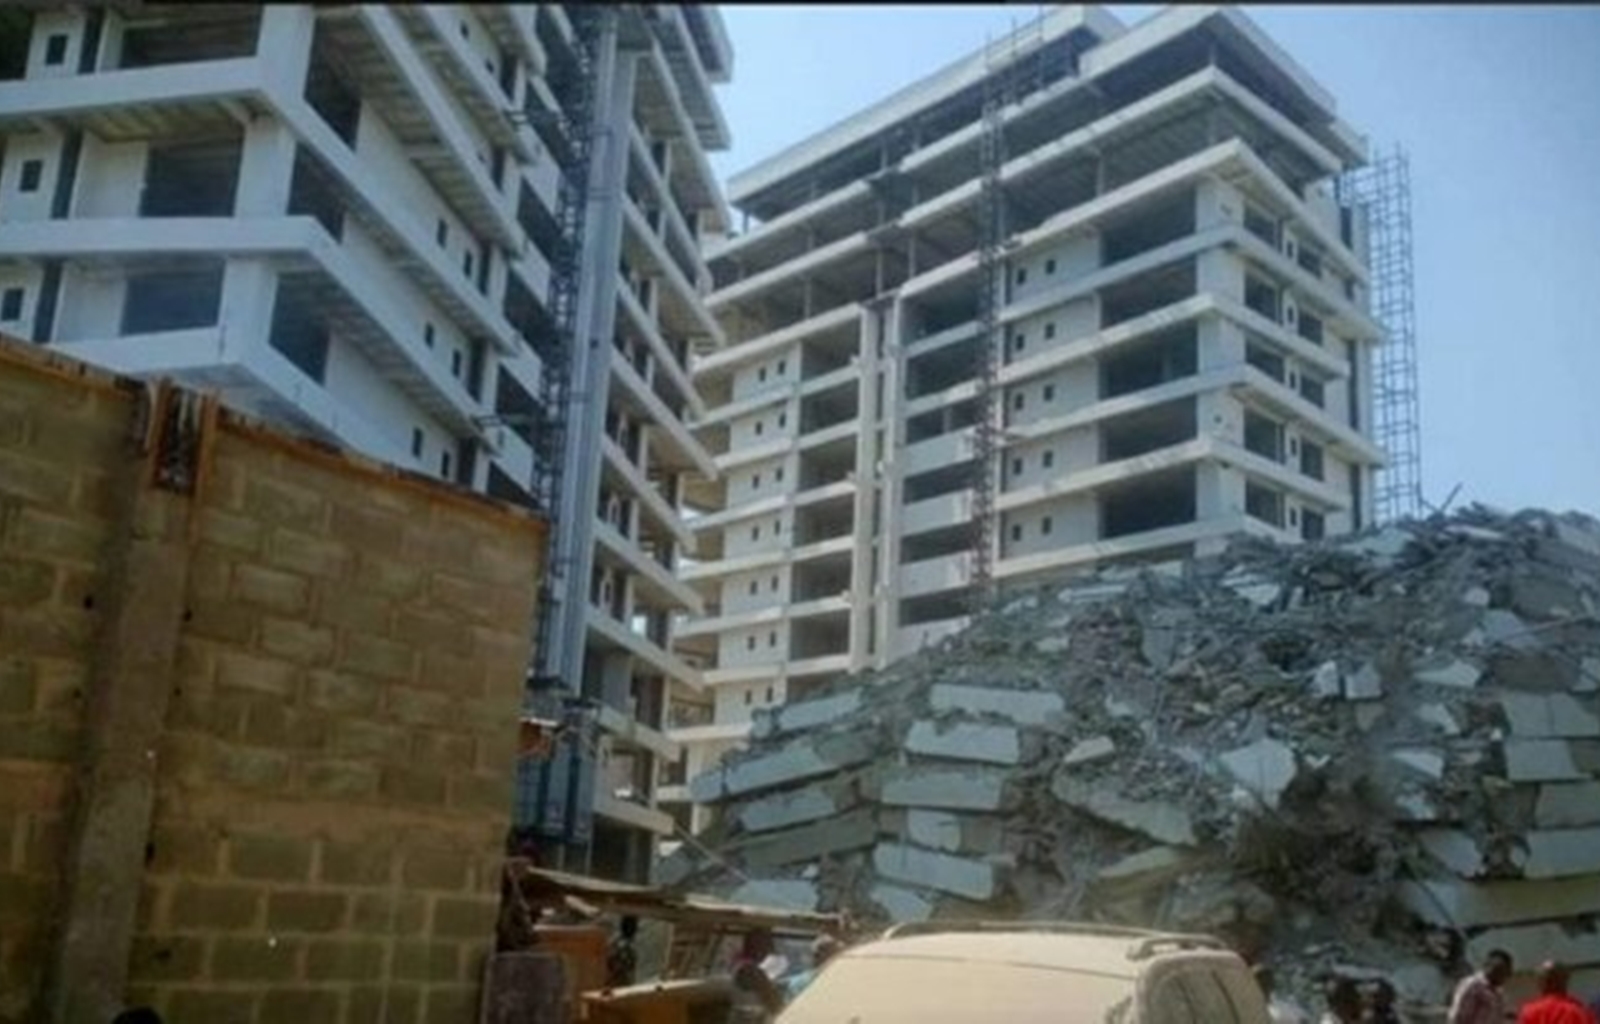 Collapsed building had approval for 21 floors